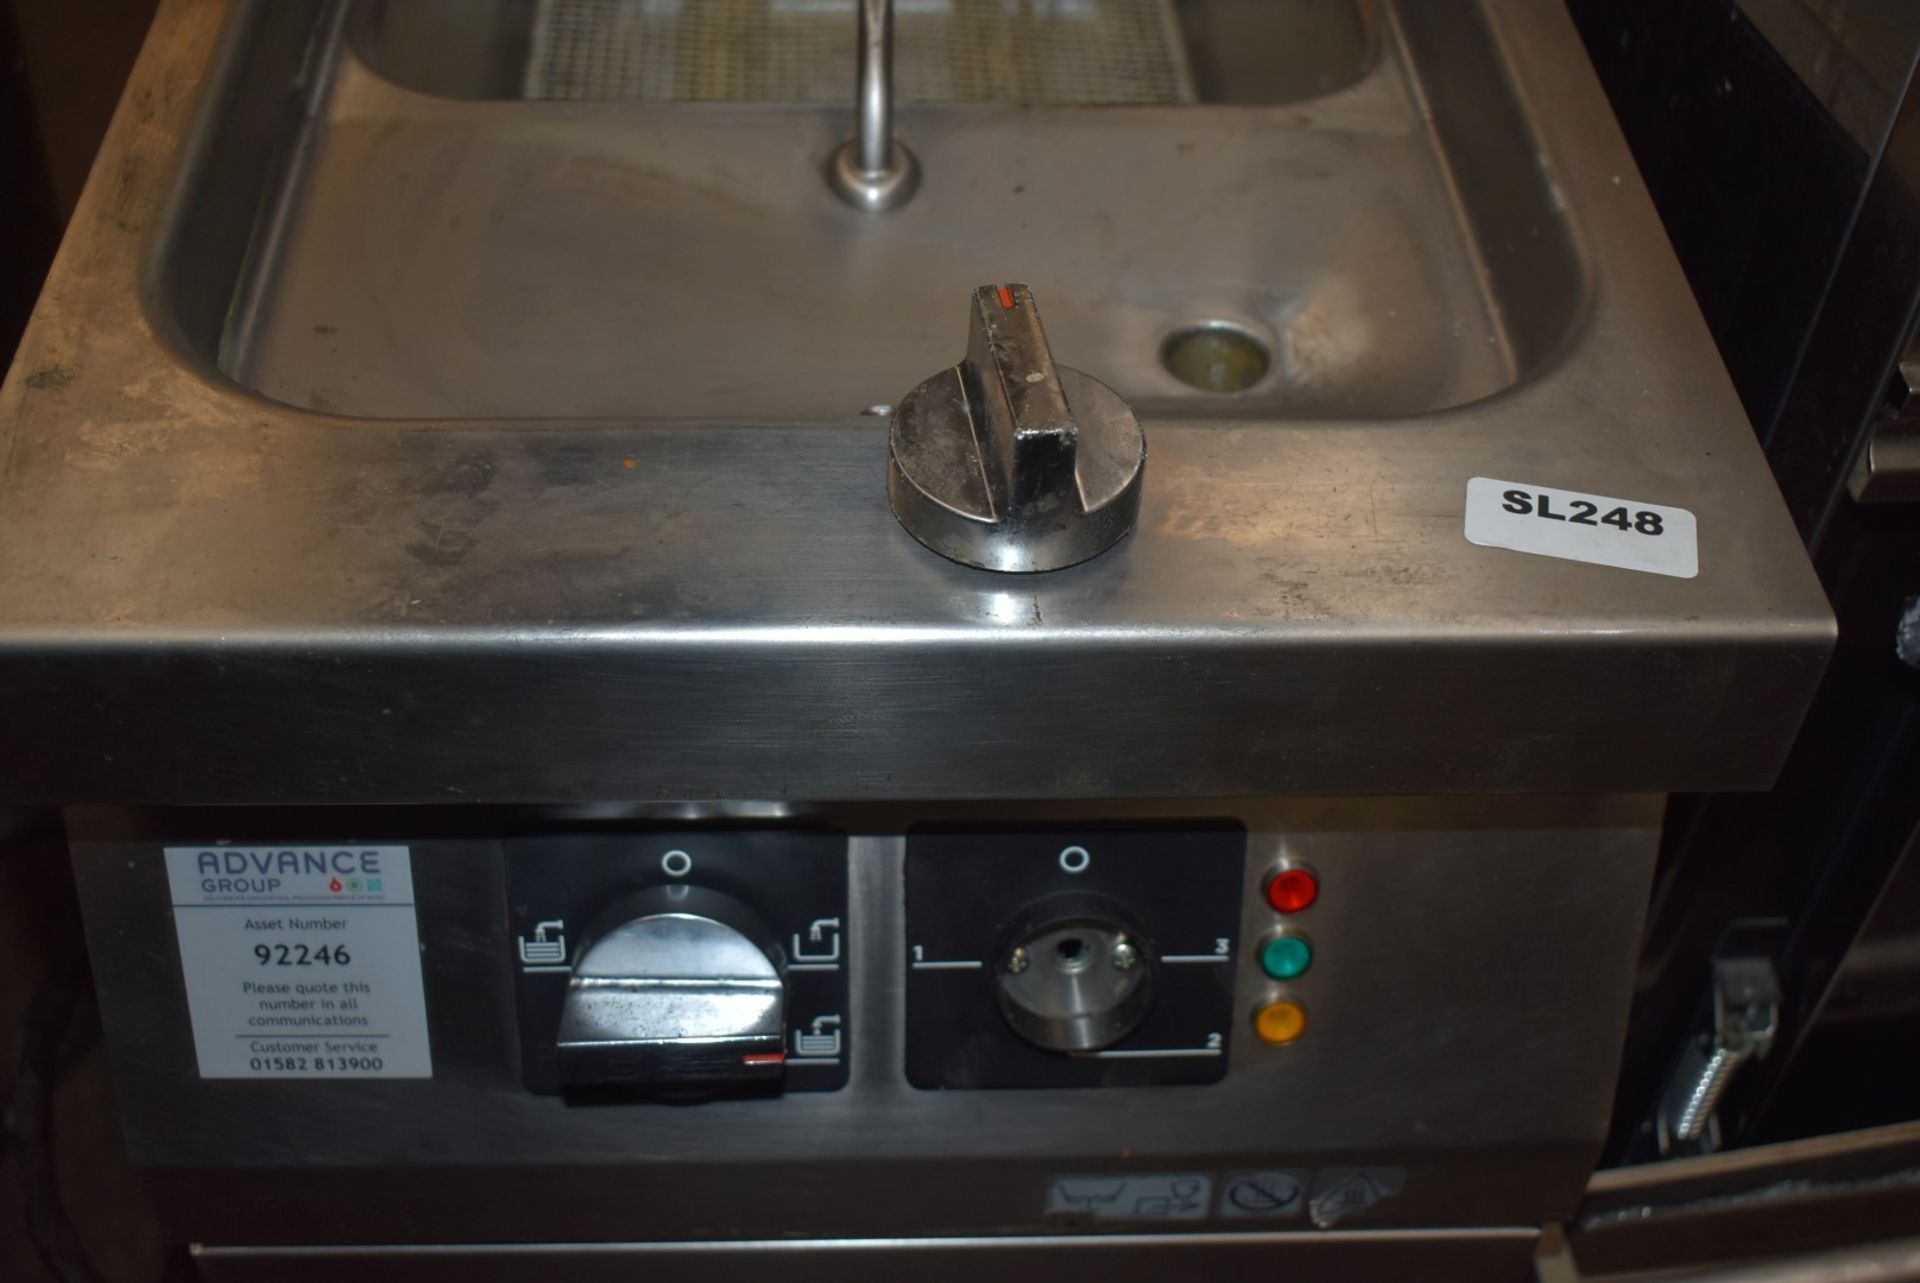 1 x Angelo Po Commercial Pasta Boiler With Stainless Steel Finish - 40cm Width - Recently Removed - Image 4 of 5